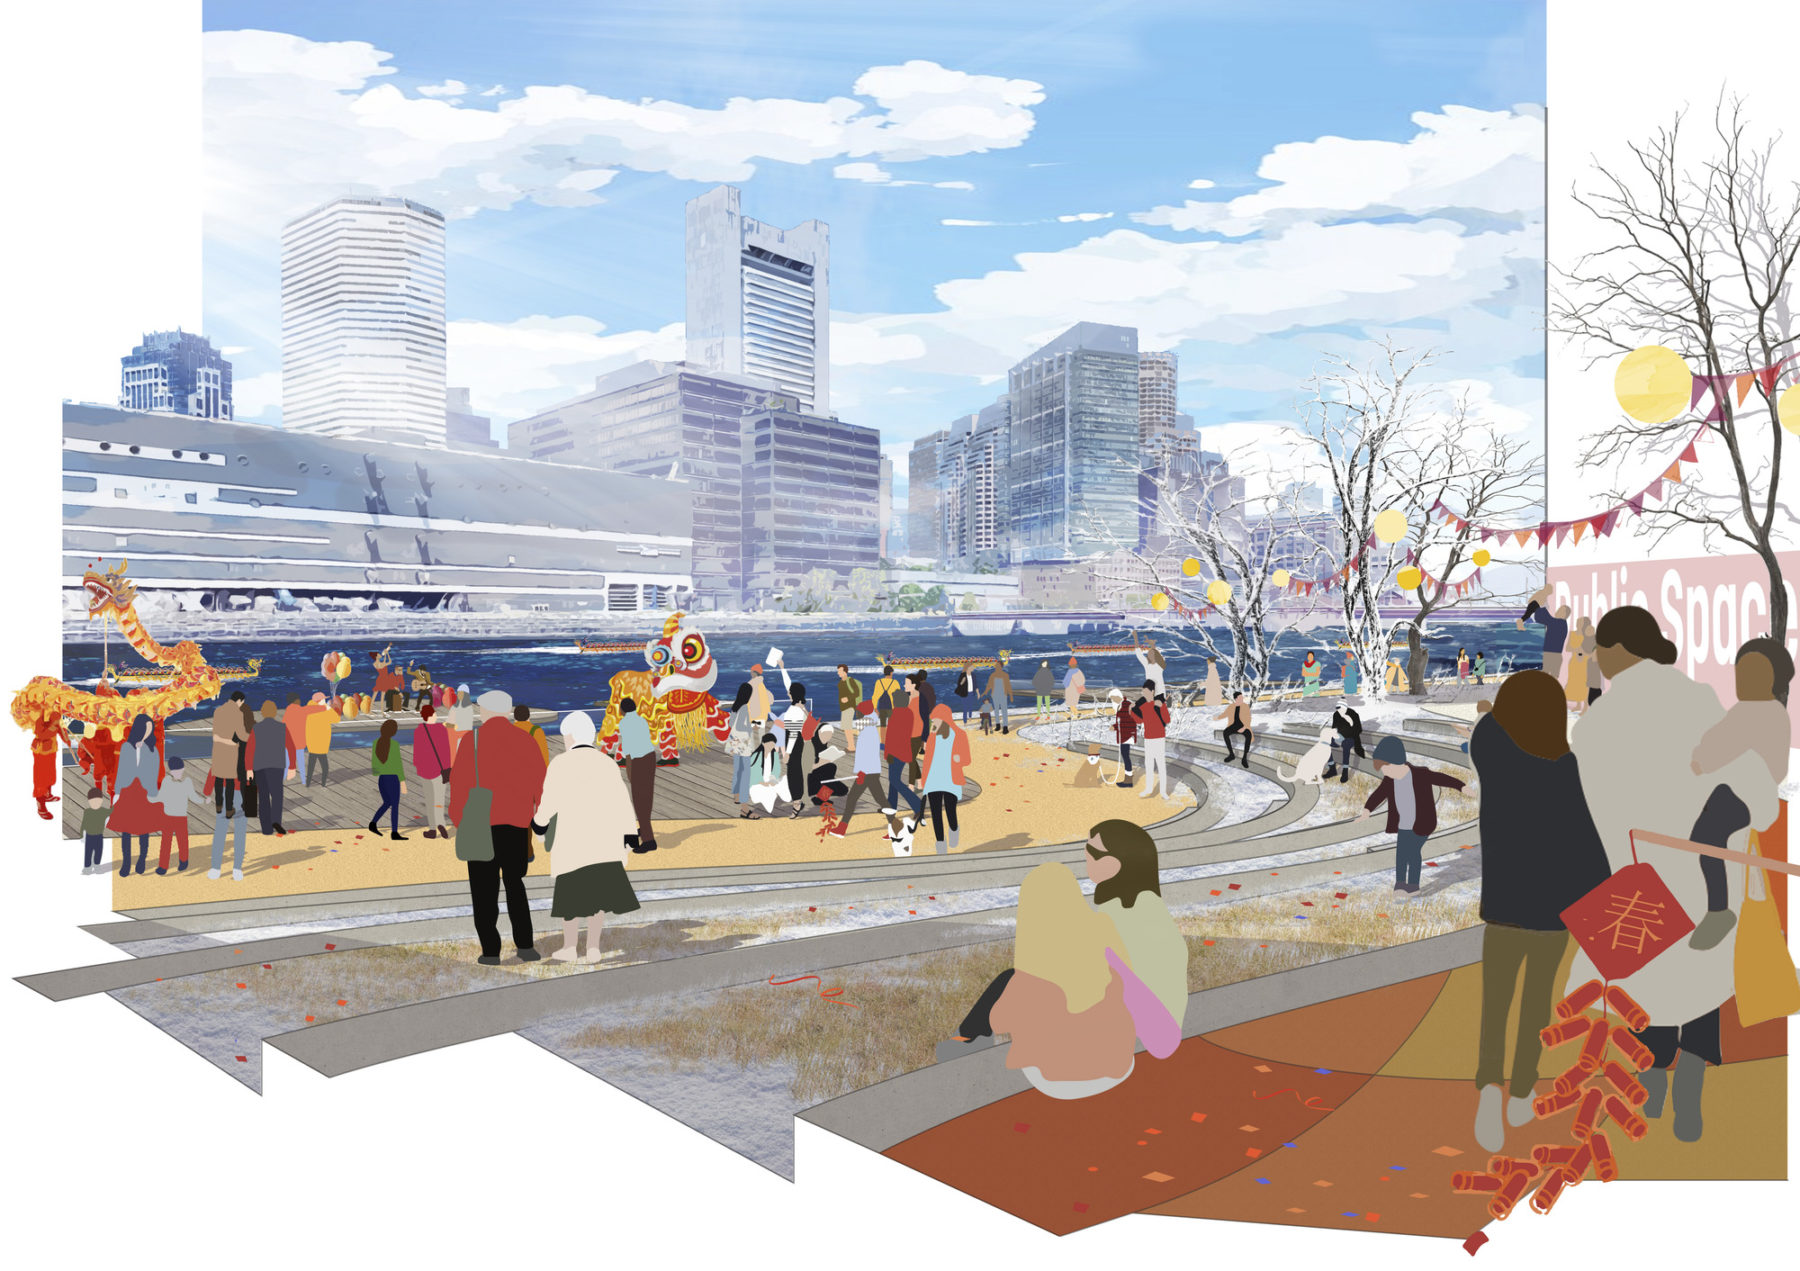 collage rendering of amphitheater along the waterfront. a cultural community event is being held